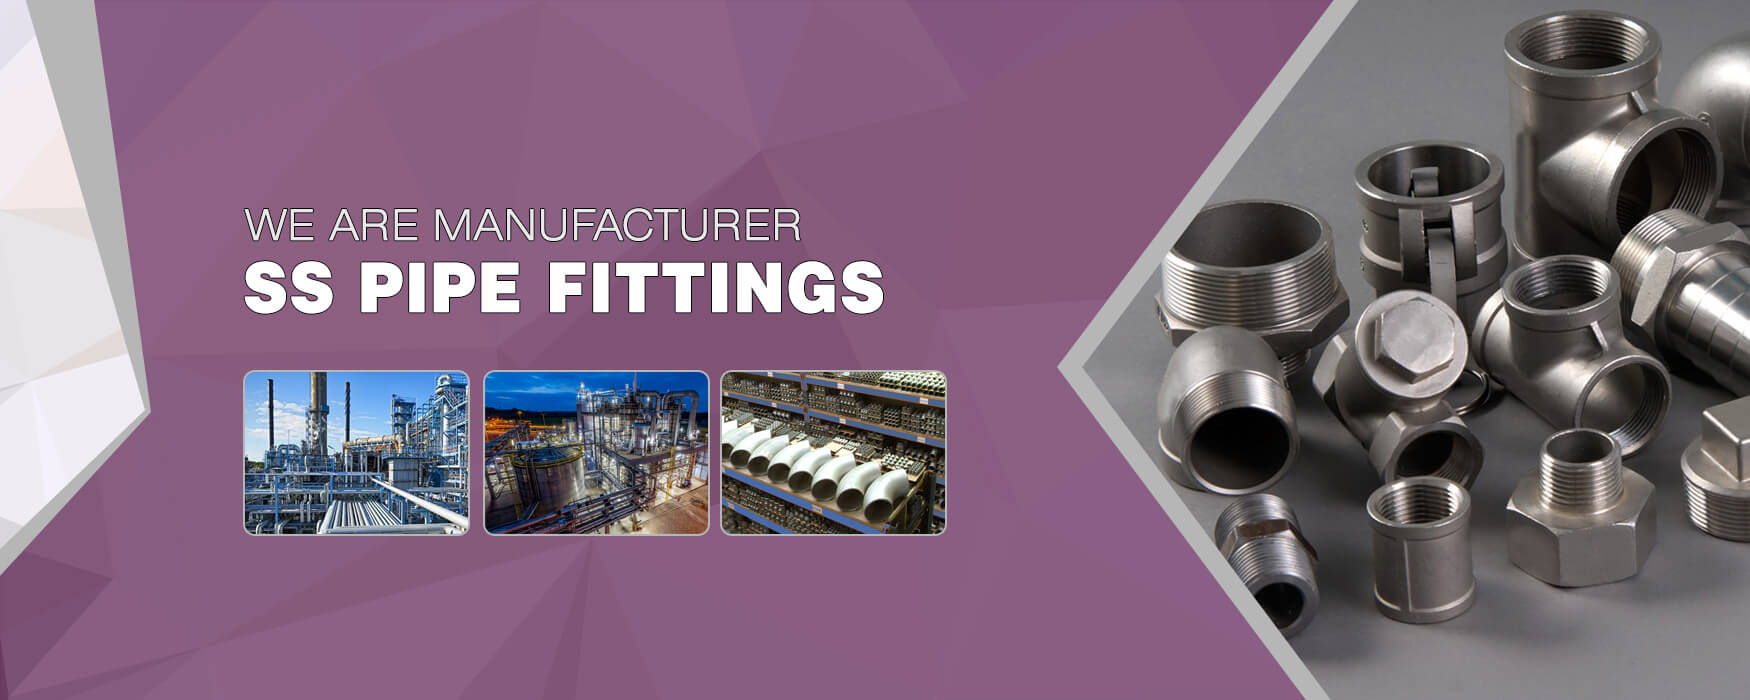 Manufacturer of SS Pipe Fittings